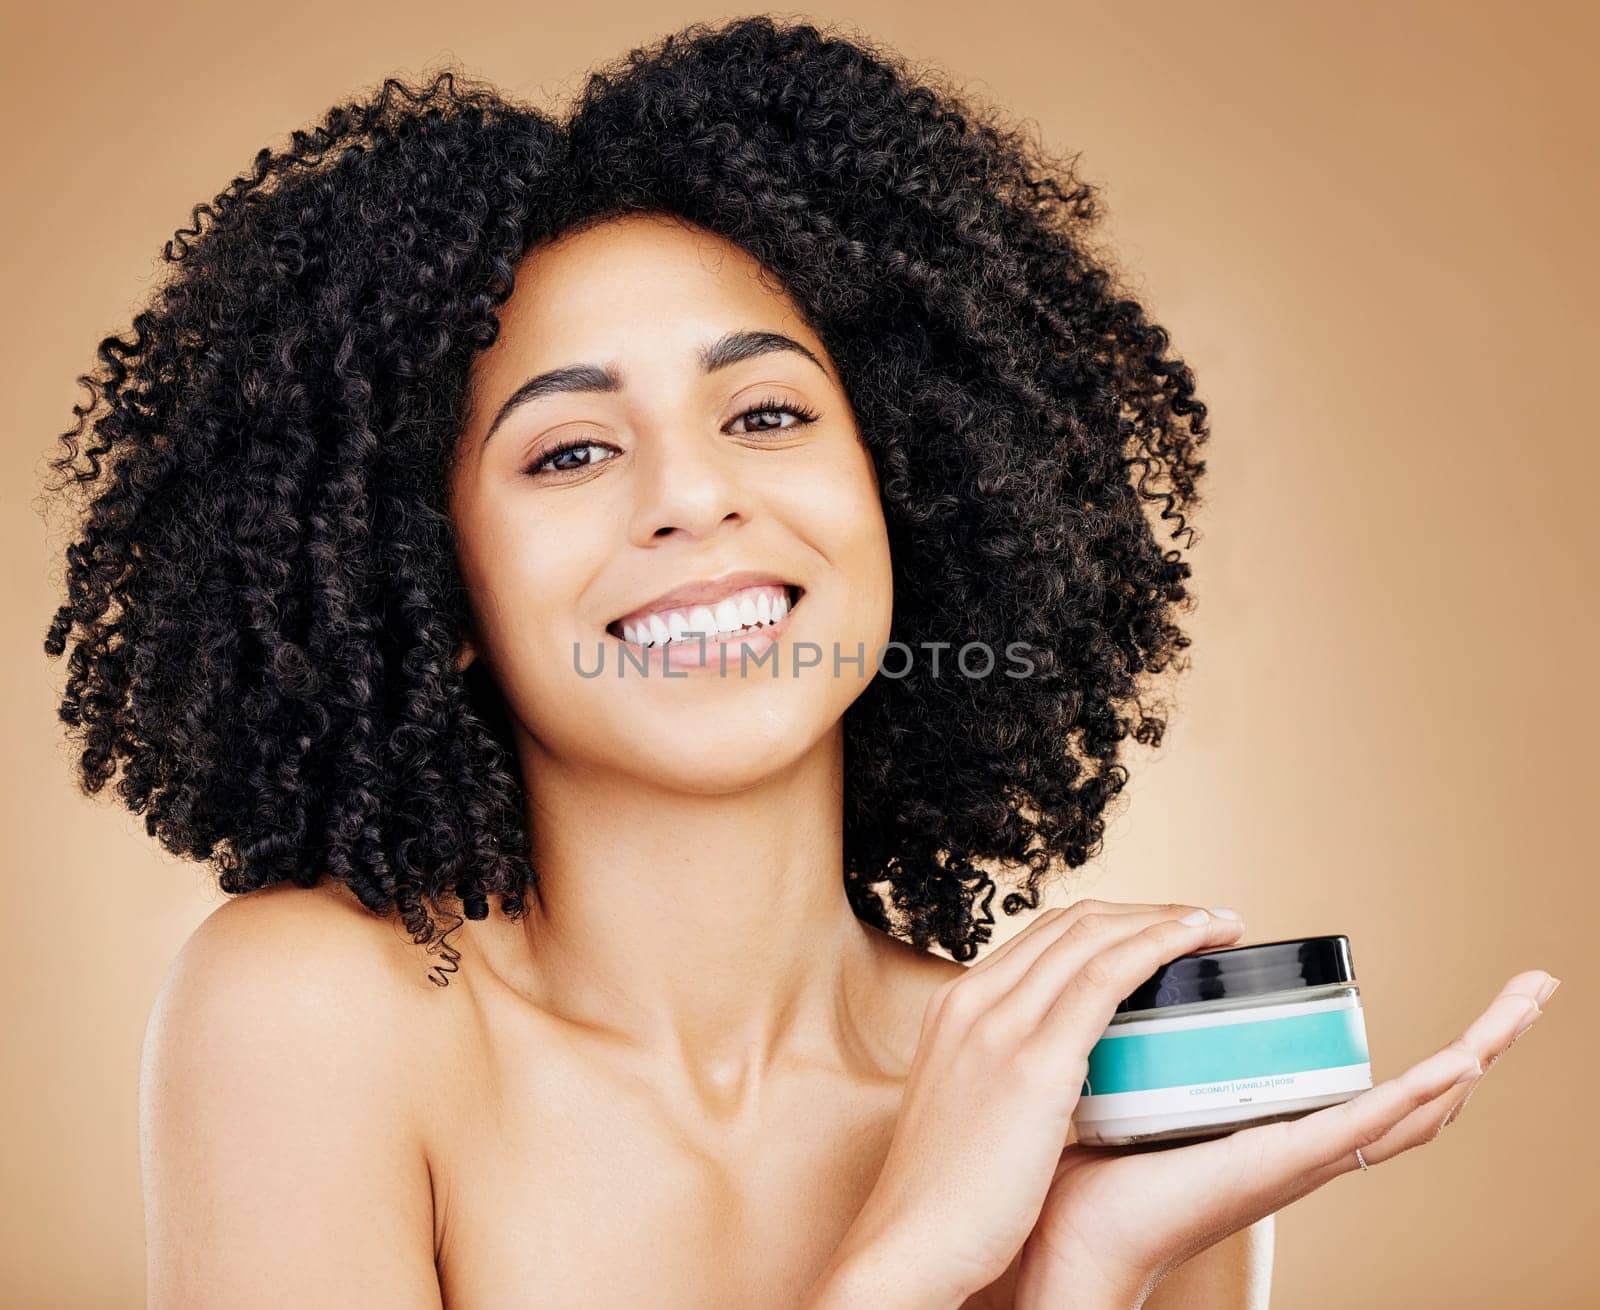 Woman, hair and container in portrait, beauty and product for wellness, cream for cosmetics on studio background. Advertising, treatment and haircare for growth and strong texture with gel or shampoo.